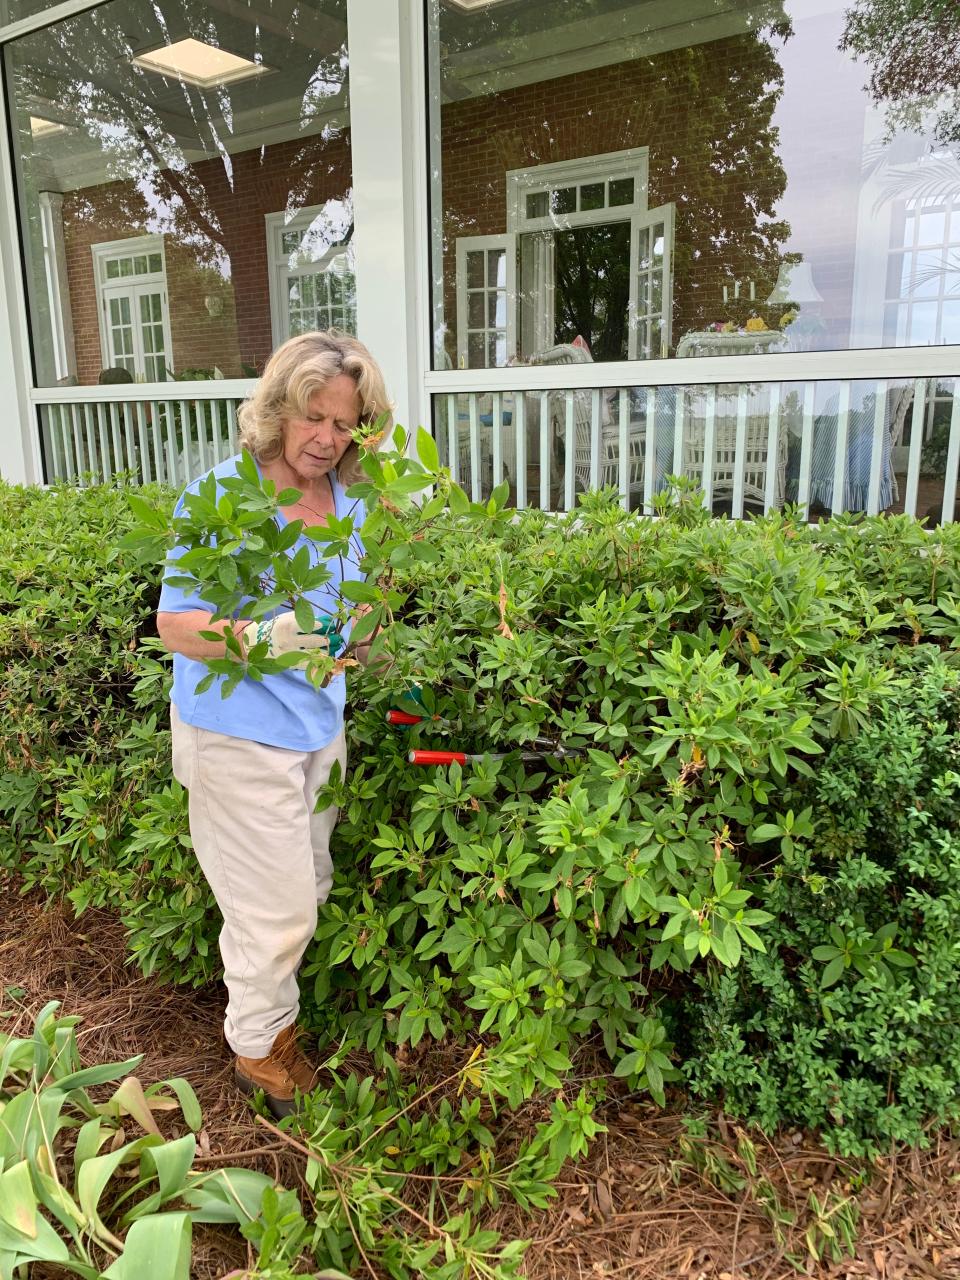 Go deep inside the bush and prune out a few branches to open up the canopy of the shrub.